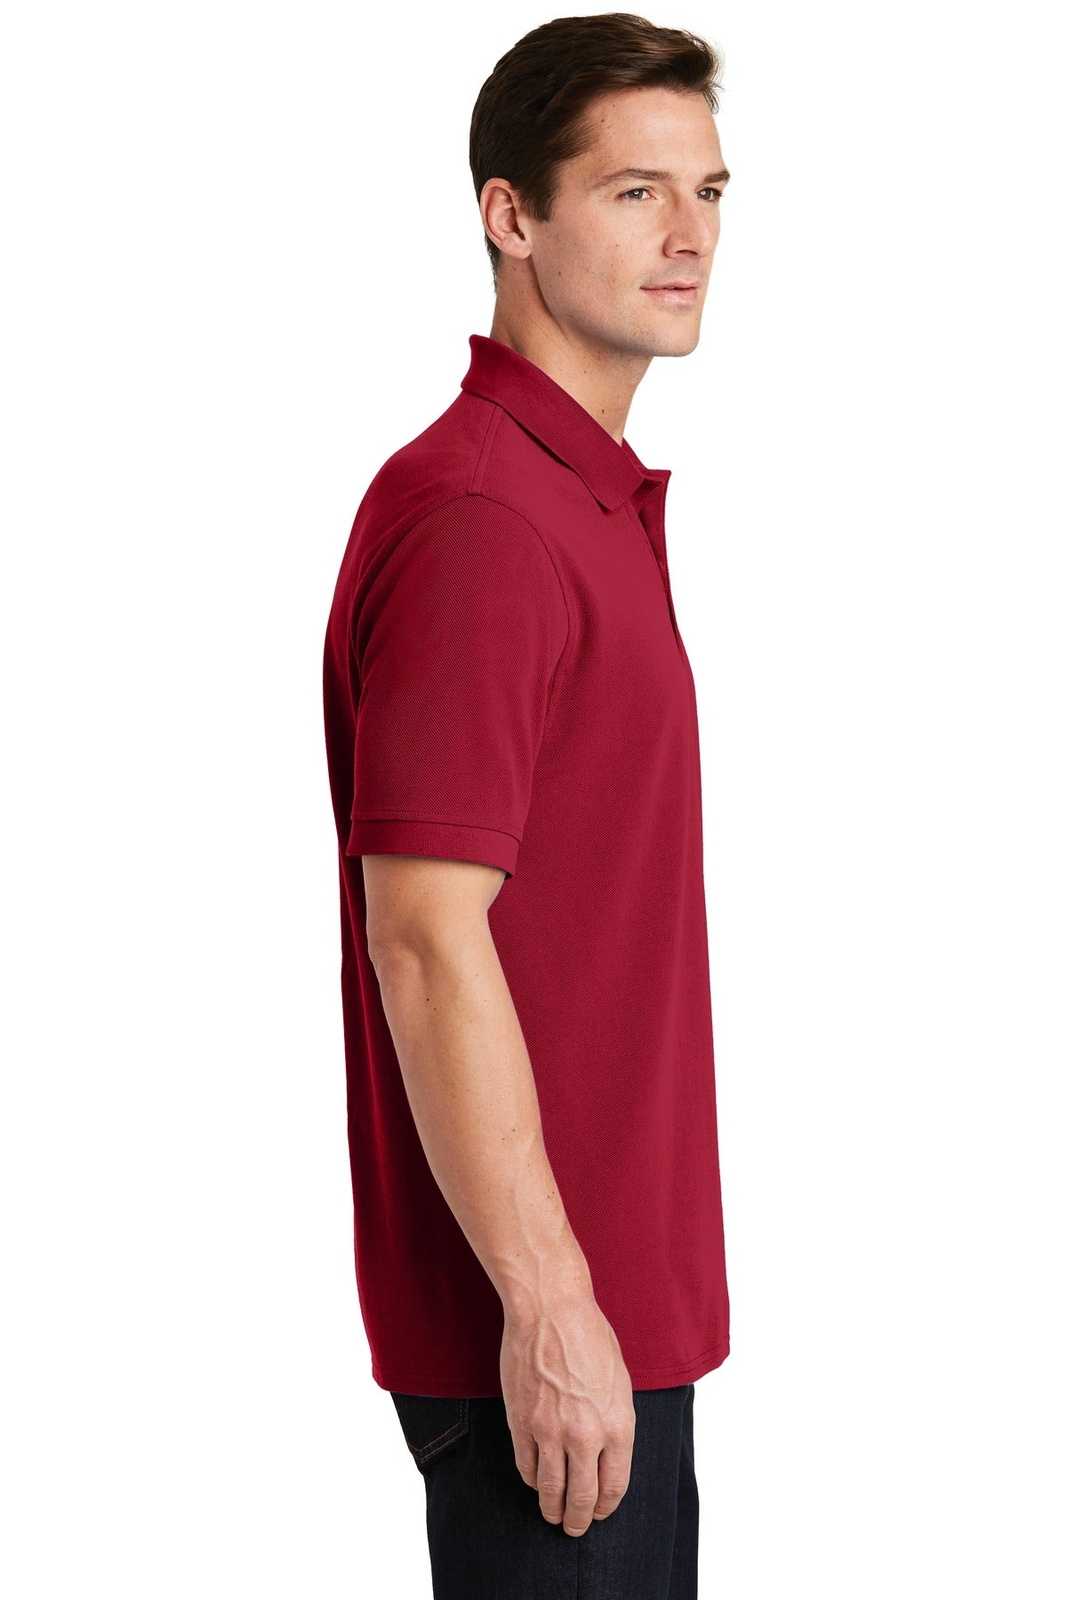 Port &amp; Company KP1500 Combed Ring Spun Pique Polo - Red - HIT a Double - 3